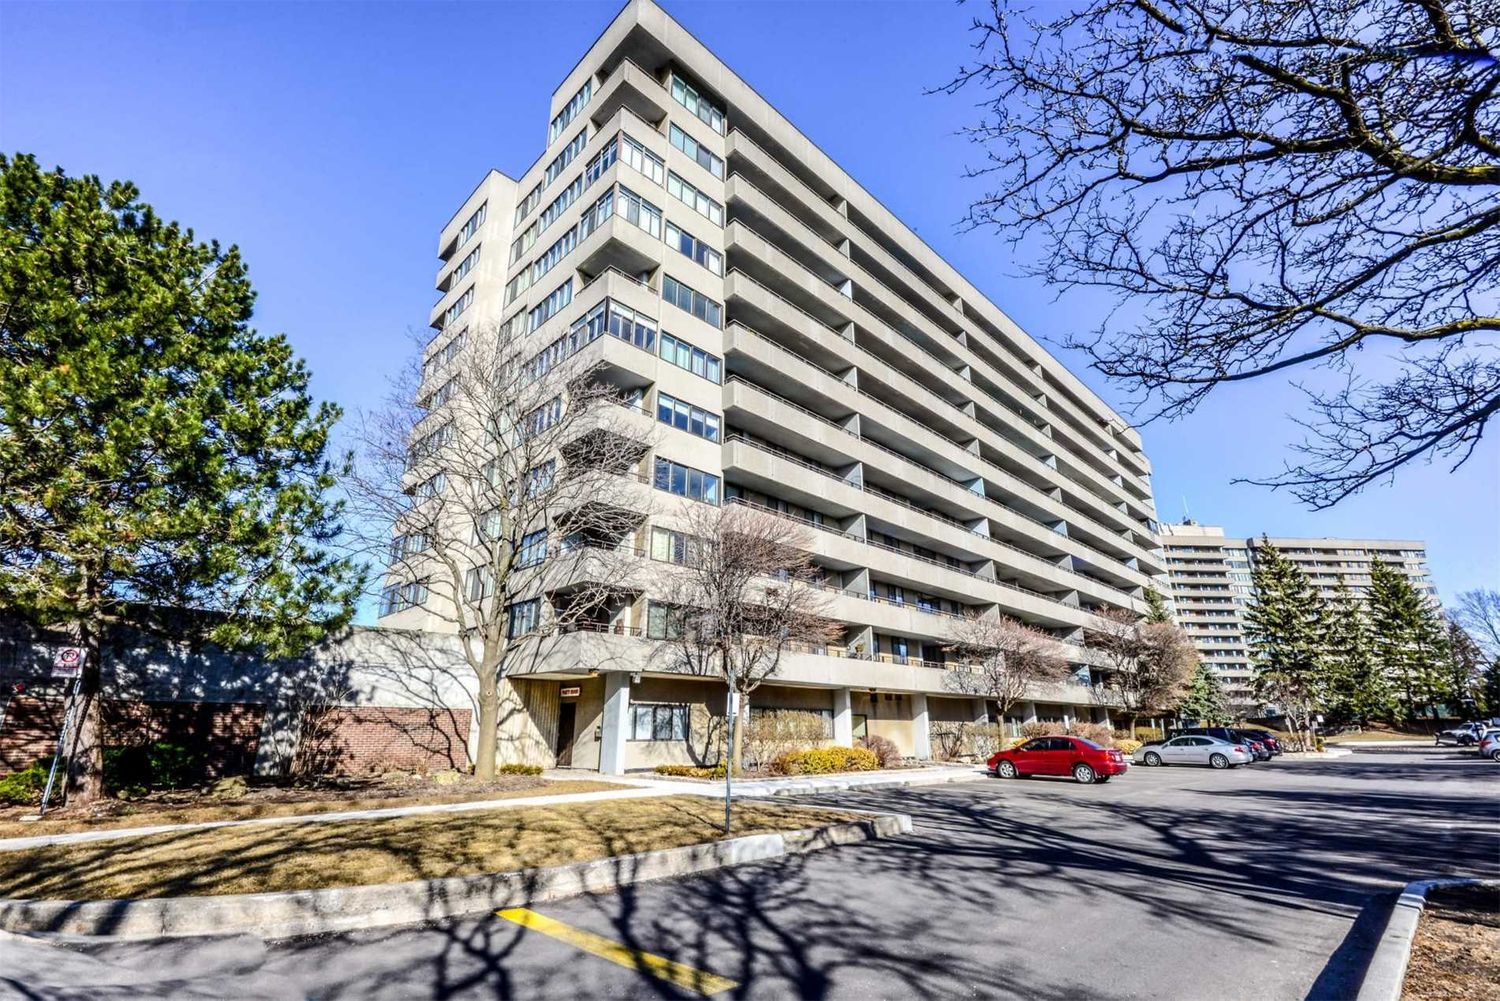 1300 Mississauga Valley Boulevard. 1320 Mississauga Valley Condos is located in  Mississauga, Toronto - image #1 of 2